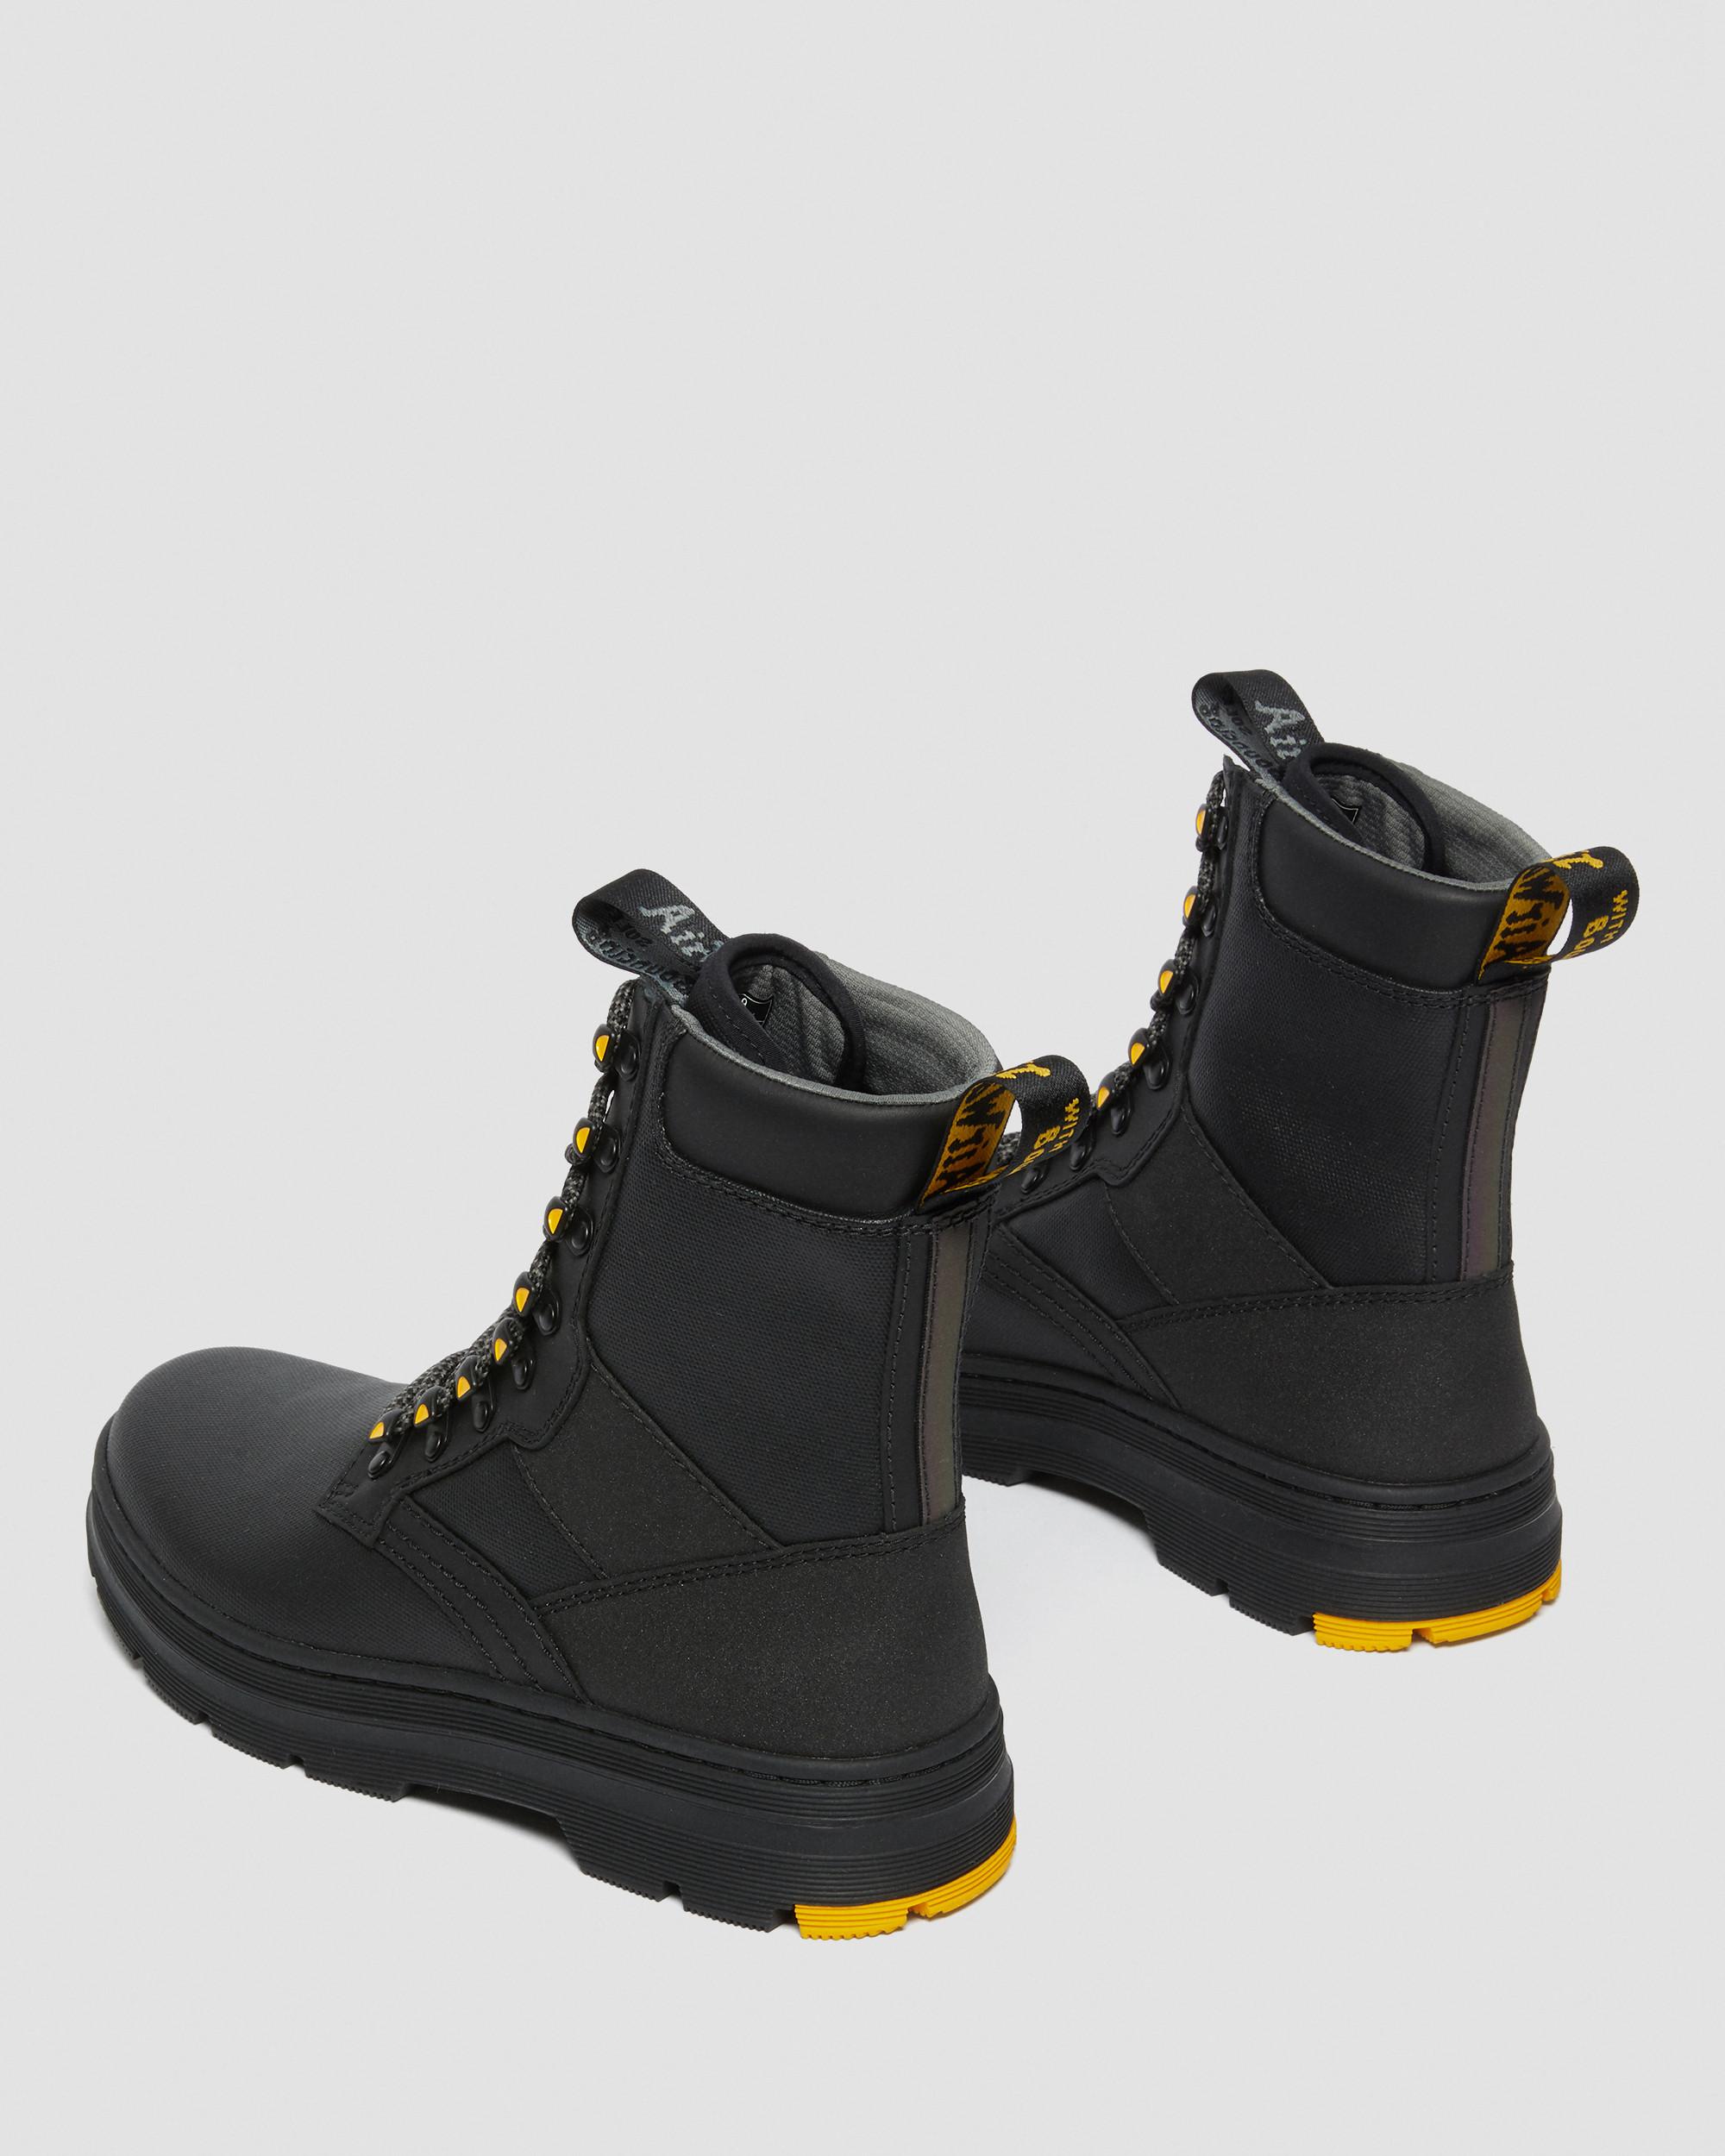 Iowa Coated Canvas Mix Utility Boots in Black | Dr. Martens